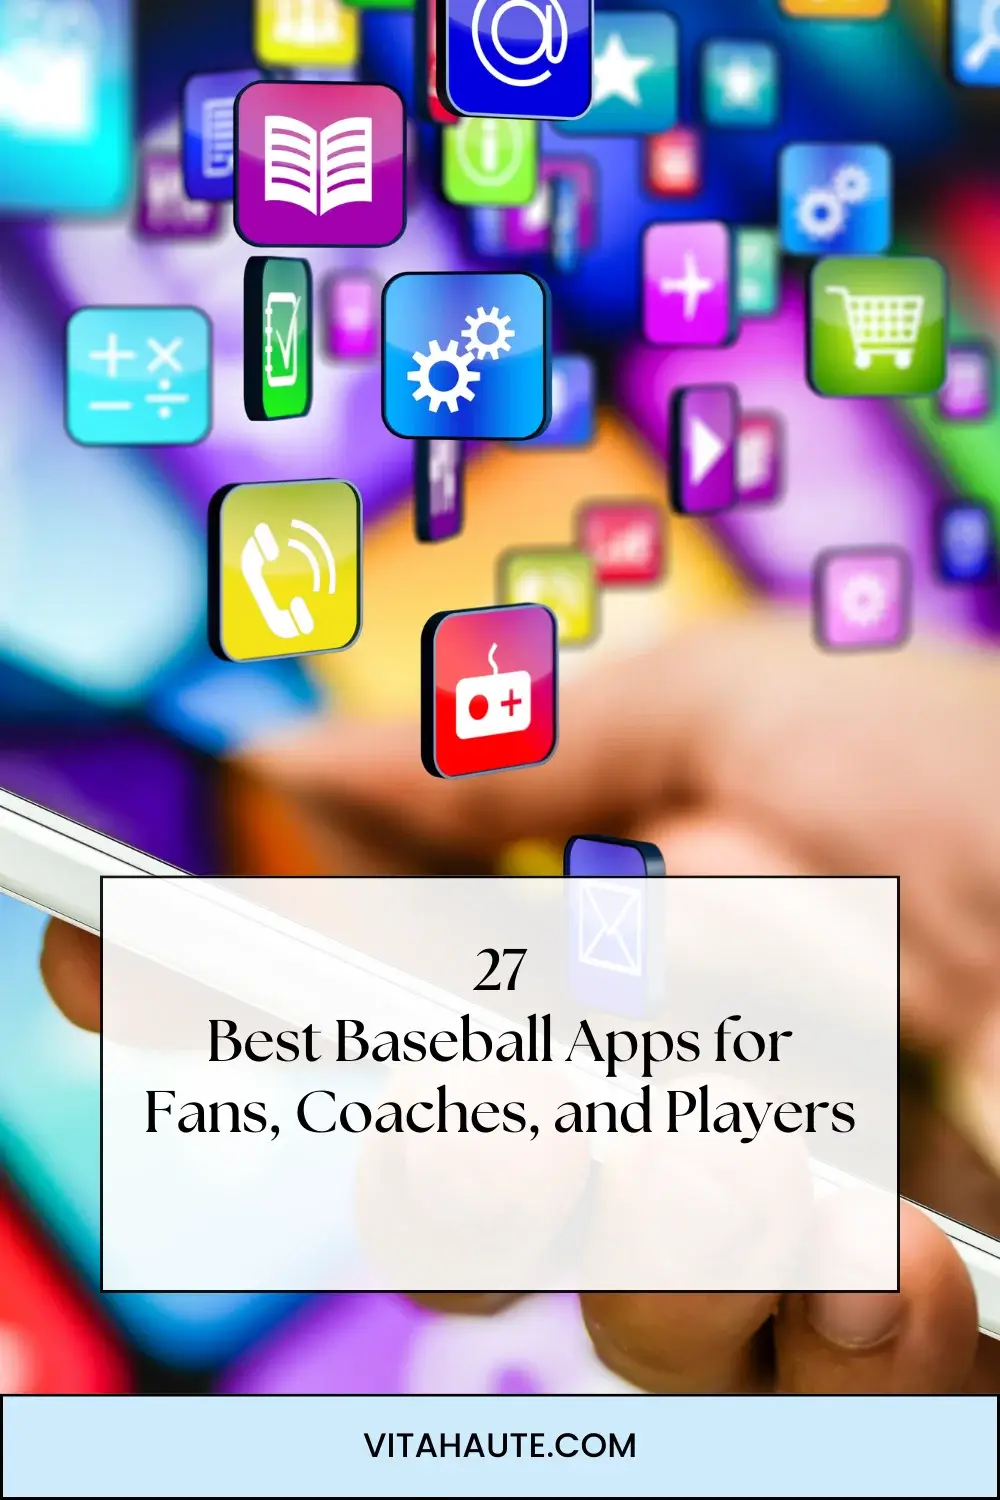 A list of A variety of apps for baseball fans and players